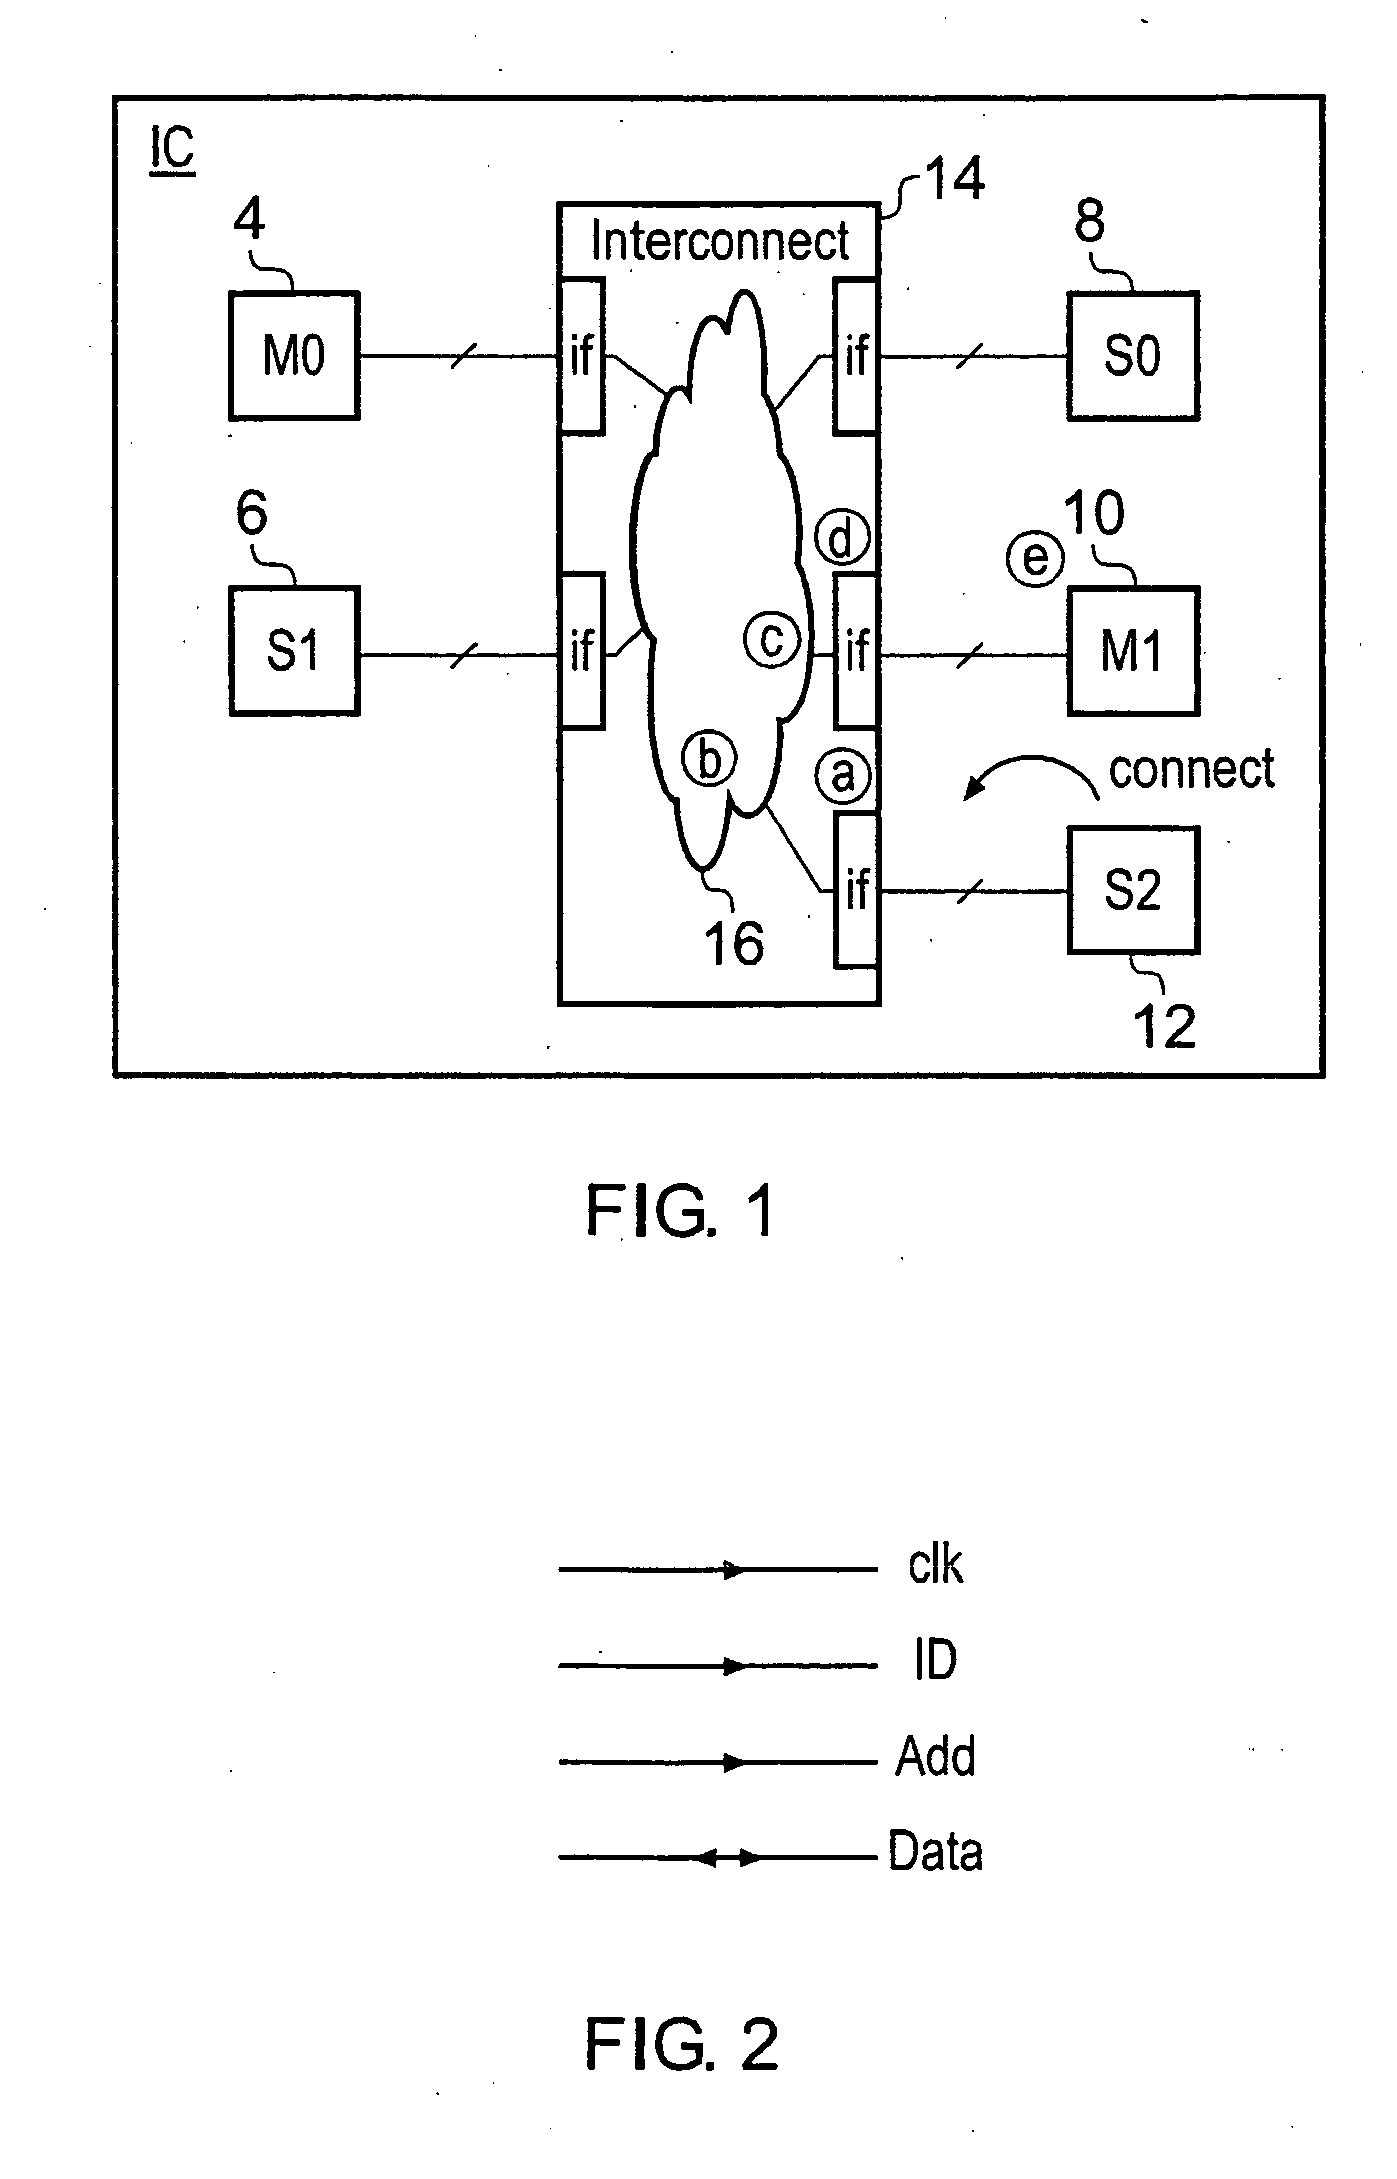 Interconnect component and device configuration generation